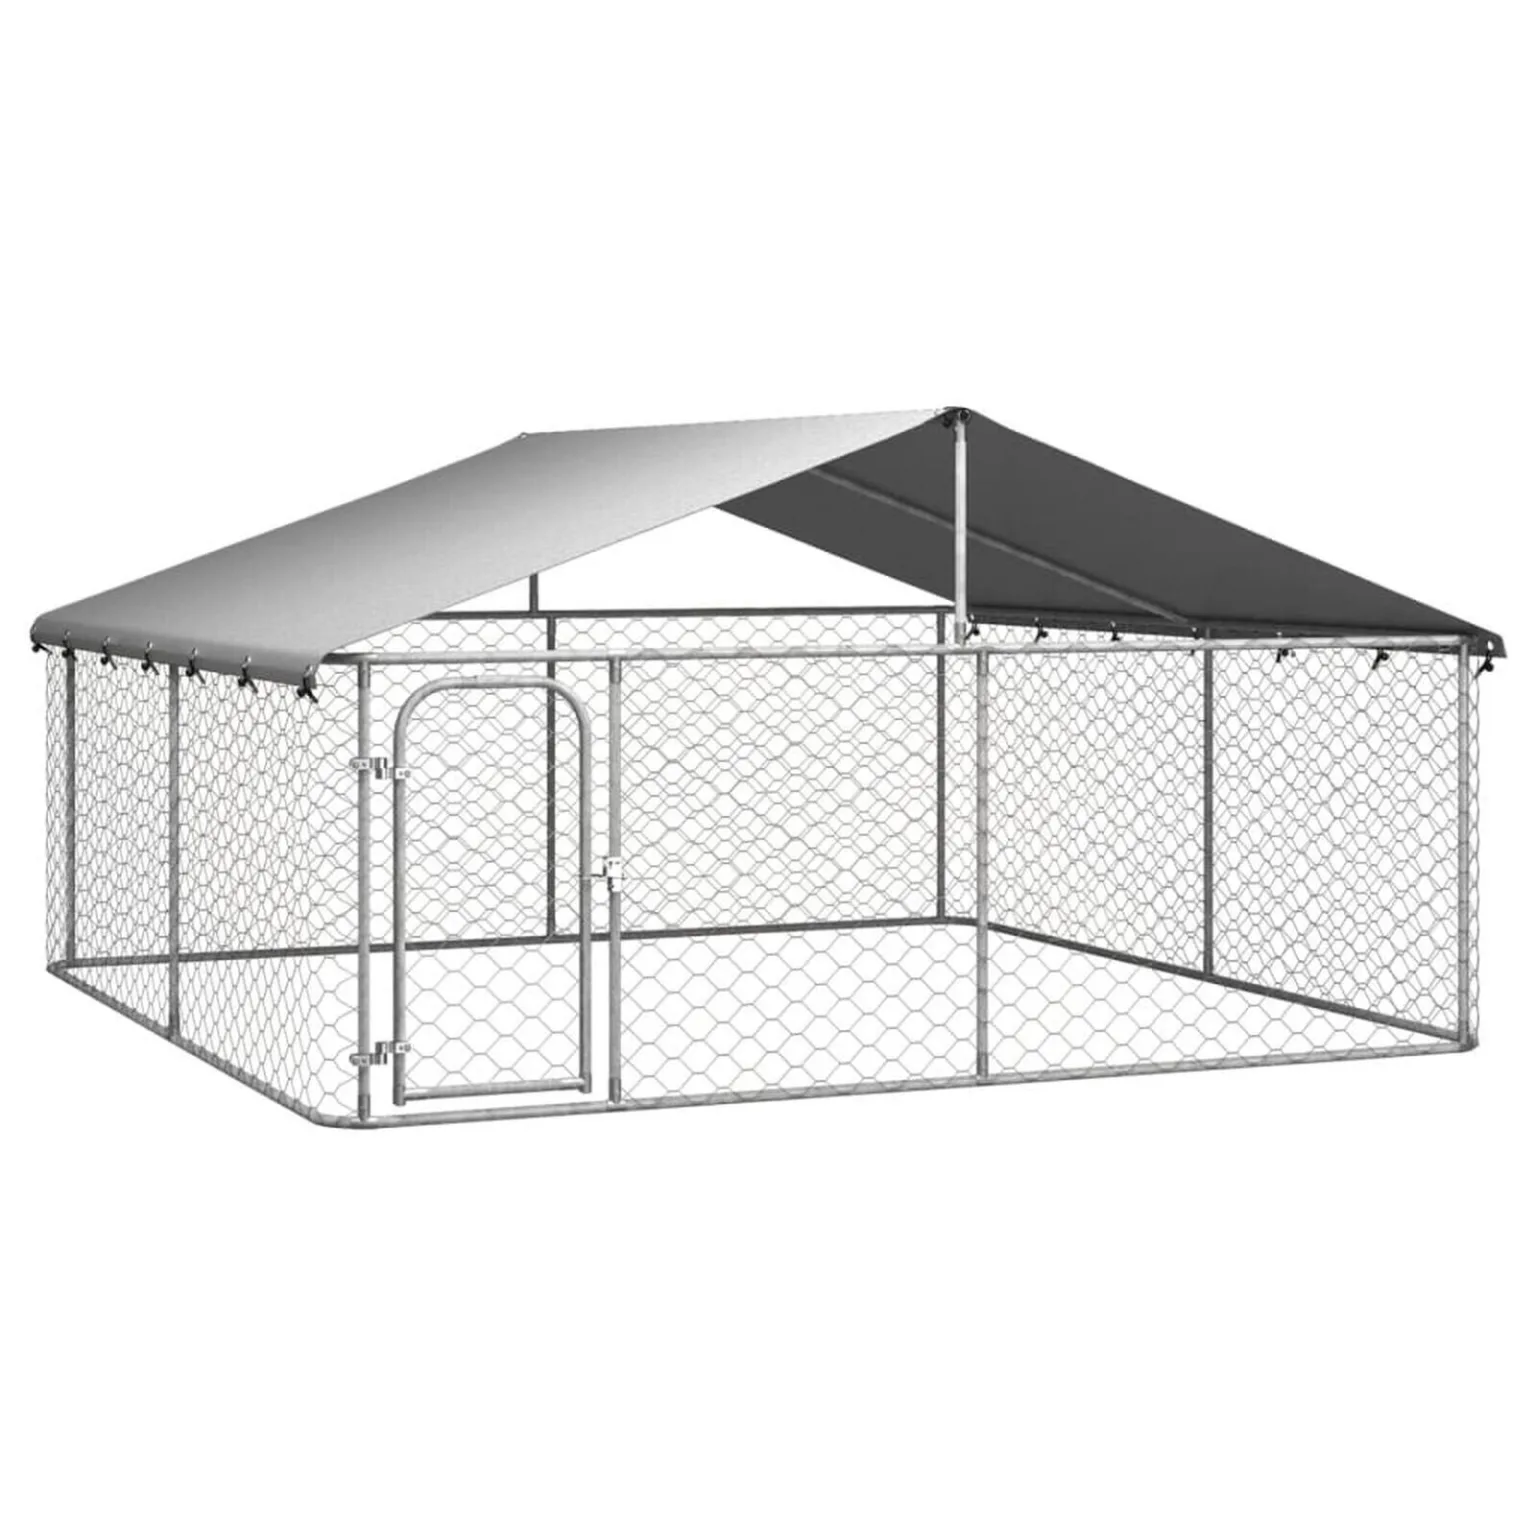 Outdoor Dog Kennel with Galvanized Steel Roof 3x3m